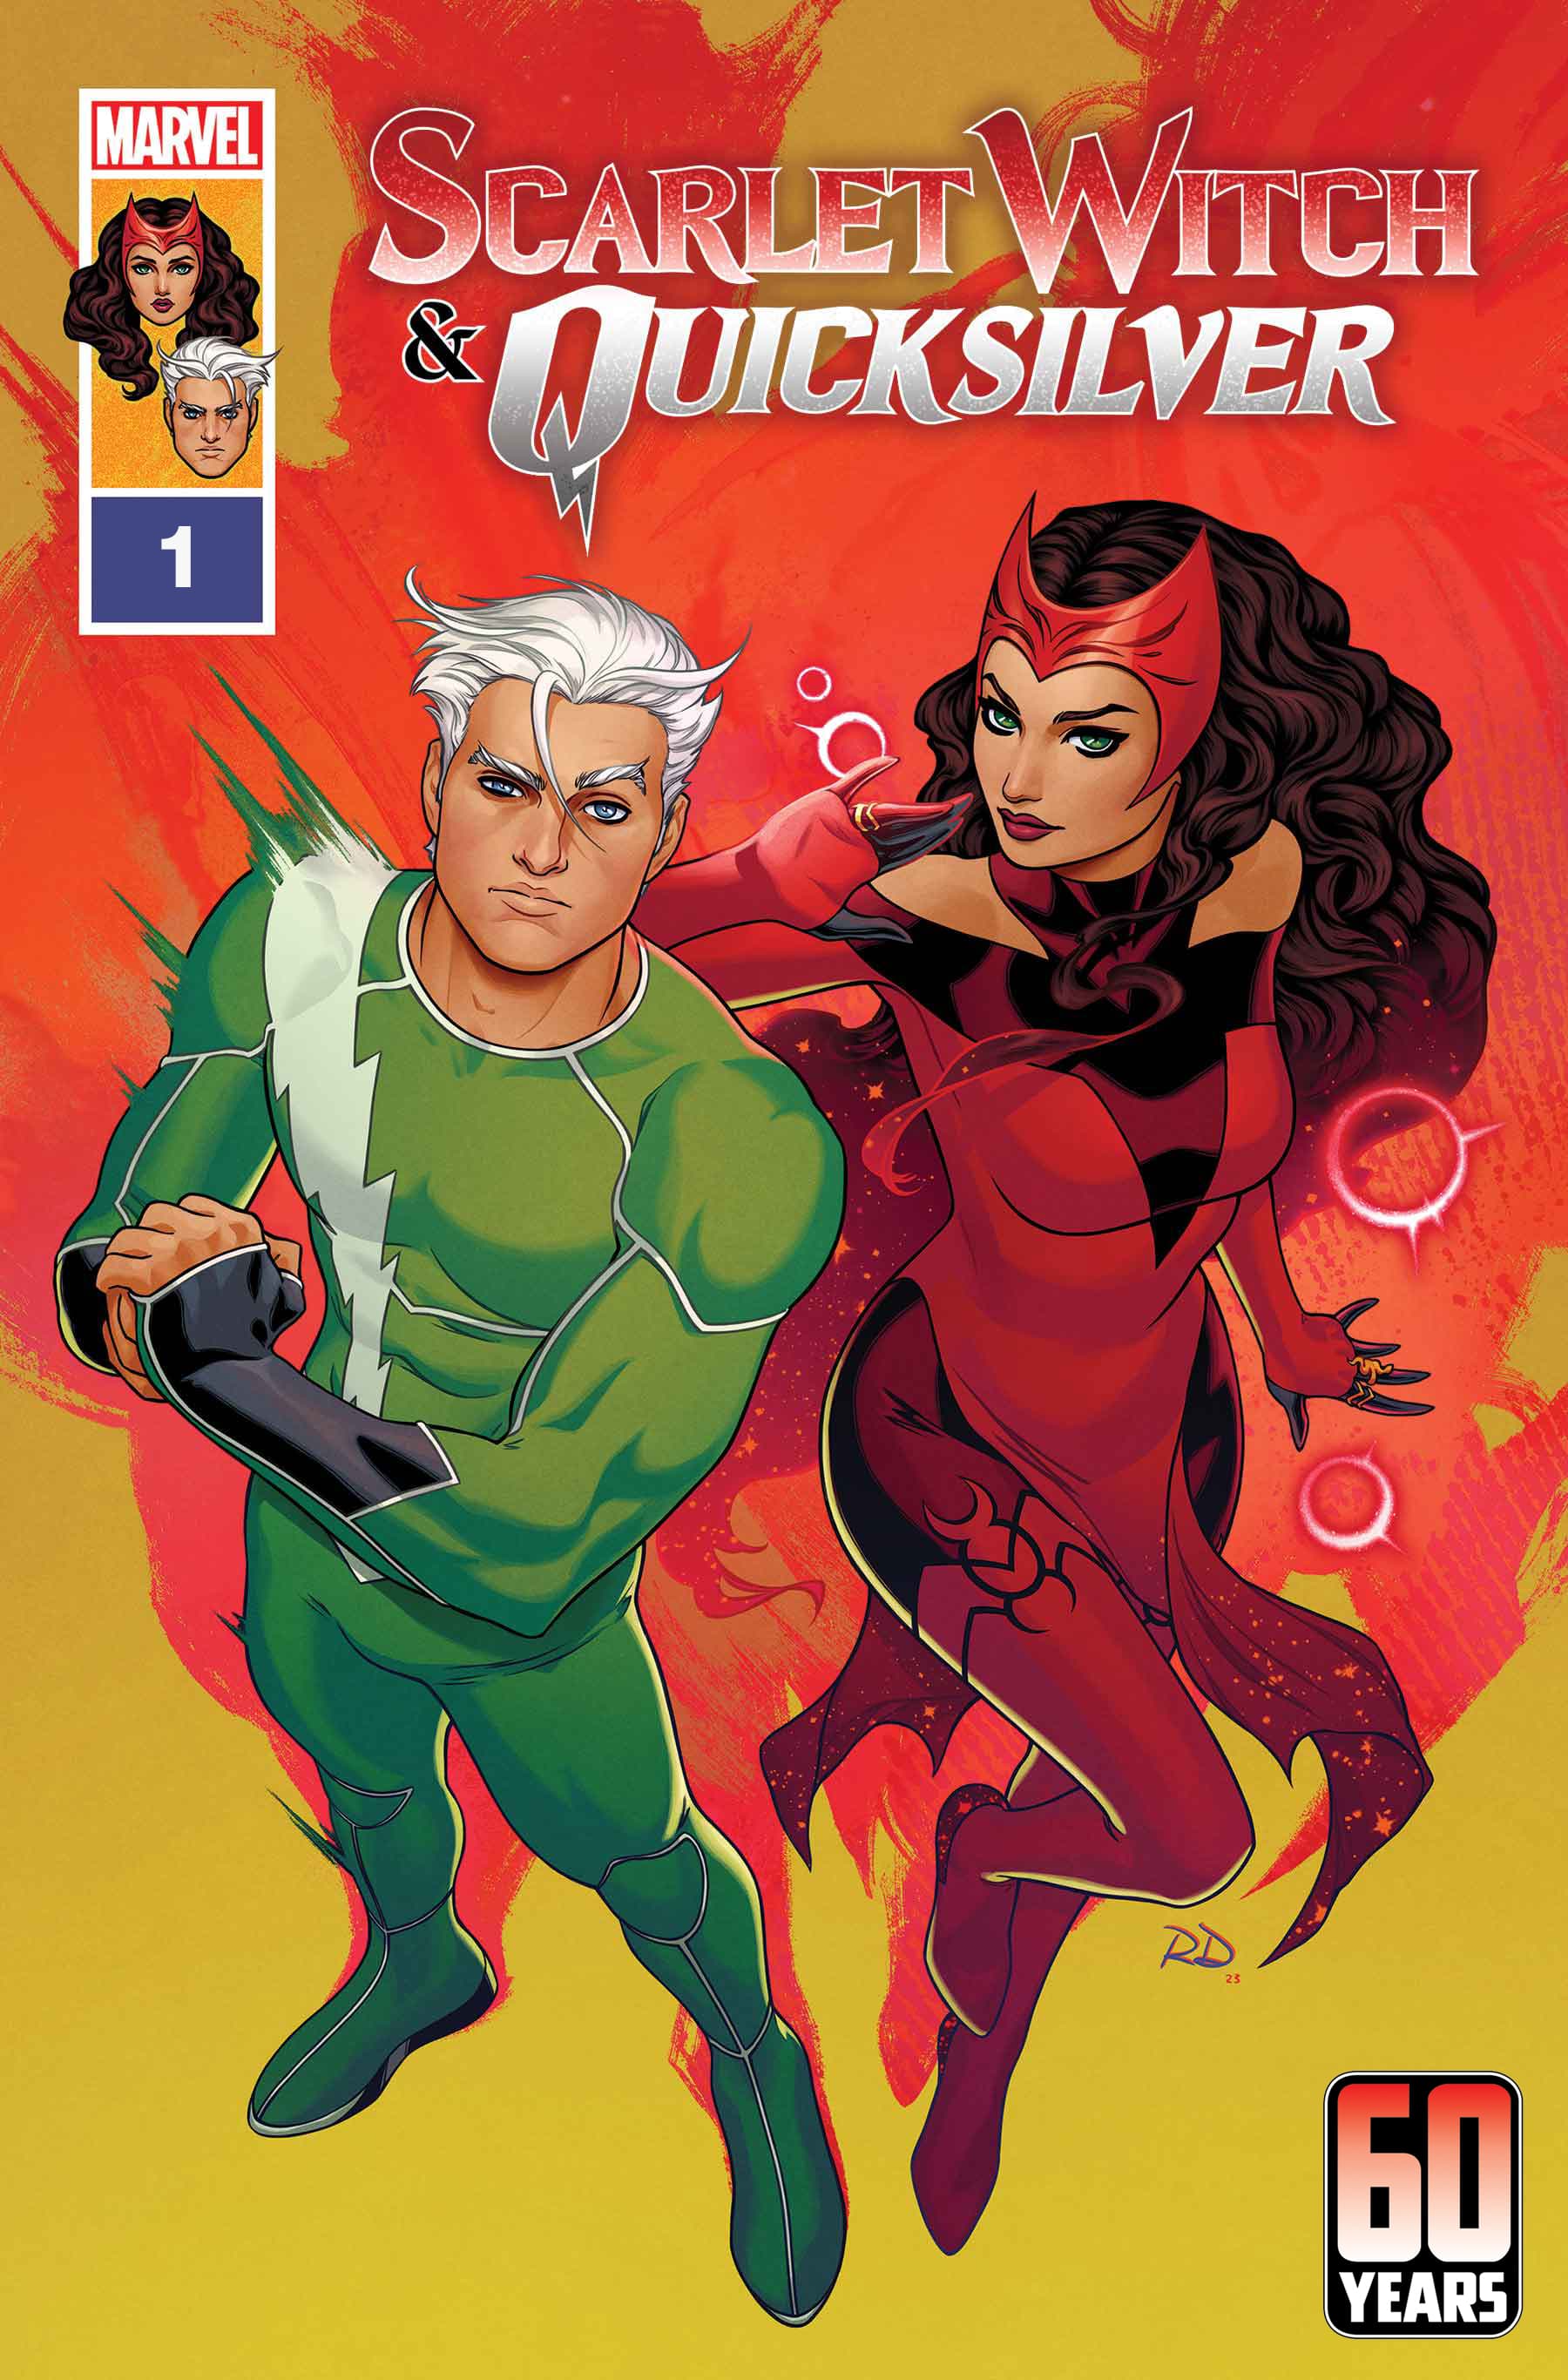 Ving2_quicksilver-and-scarlet-witch - UNIVERSO HQ